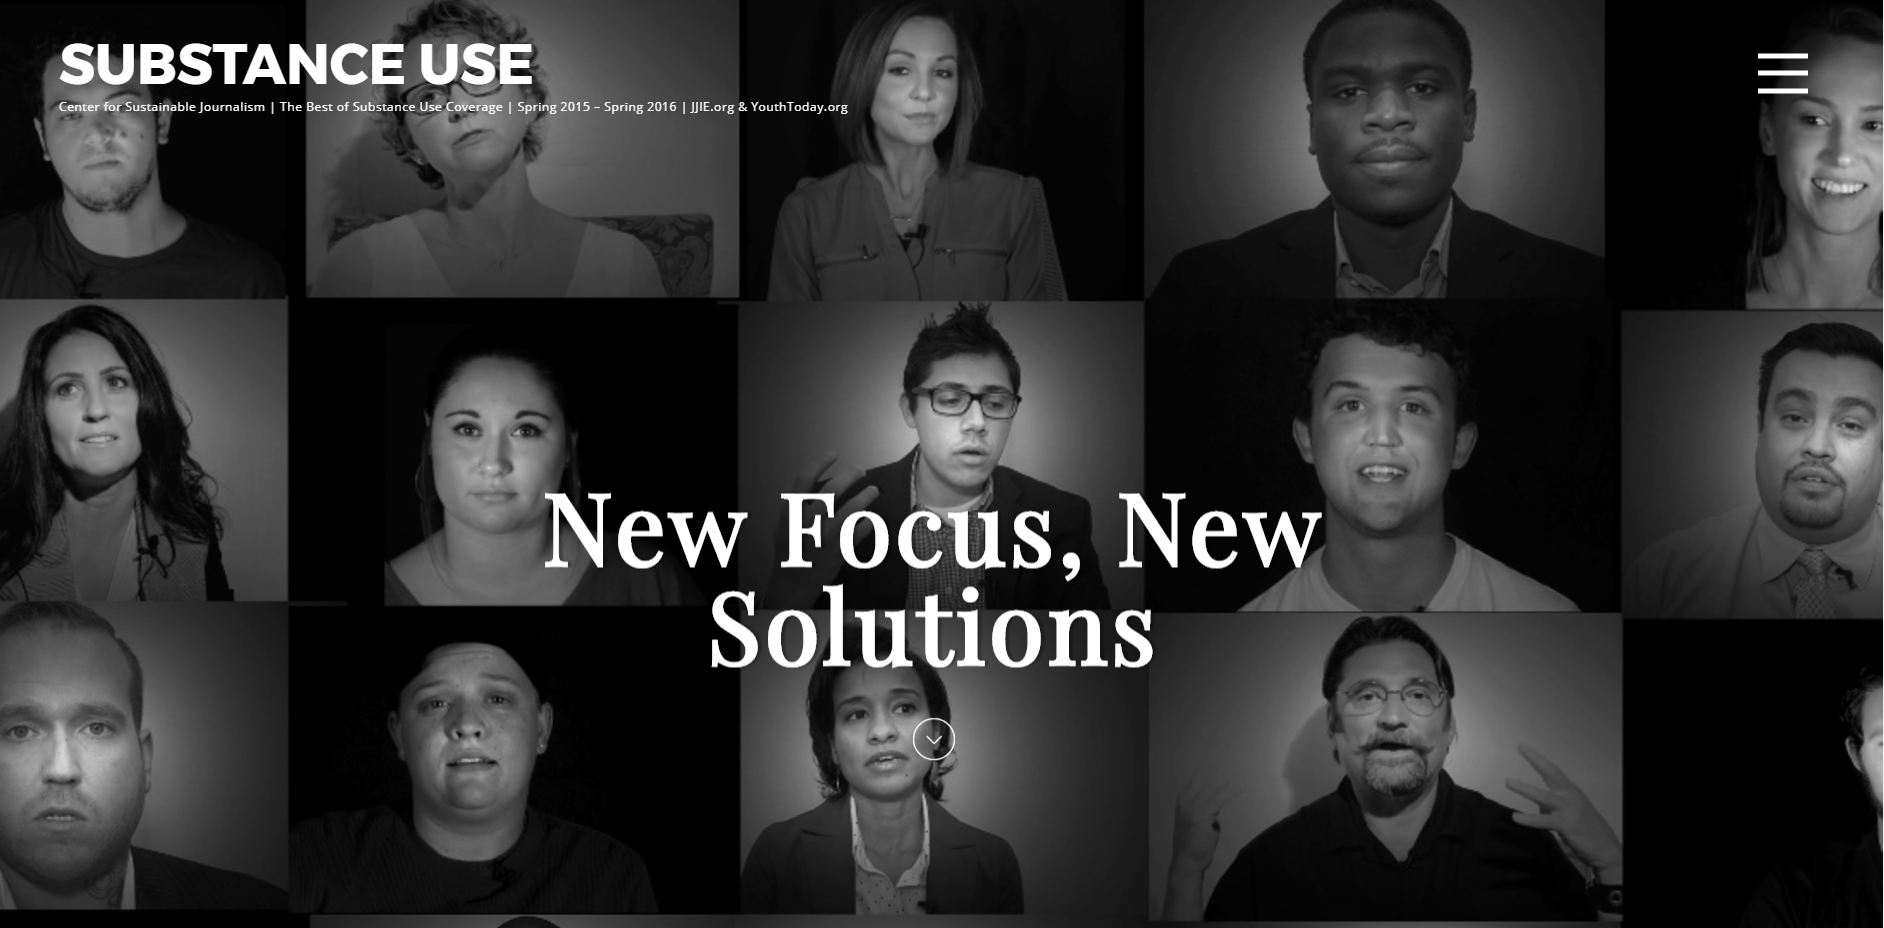 Substance Use: New Focus, New Solutions digital magazine cover with several head shots of people in recovery or working in the field of substance use problems.